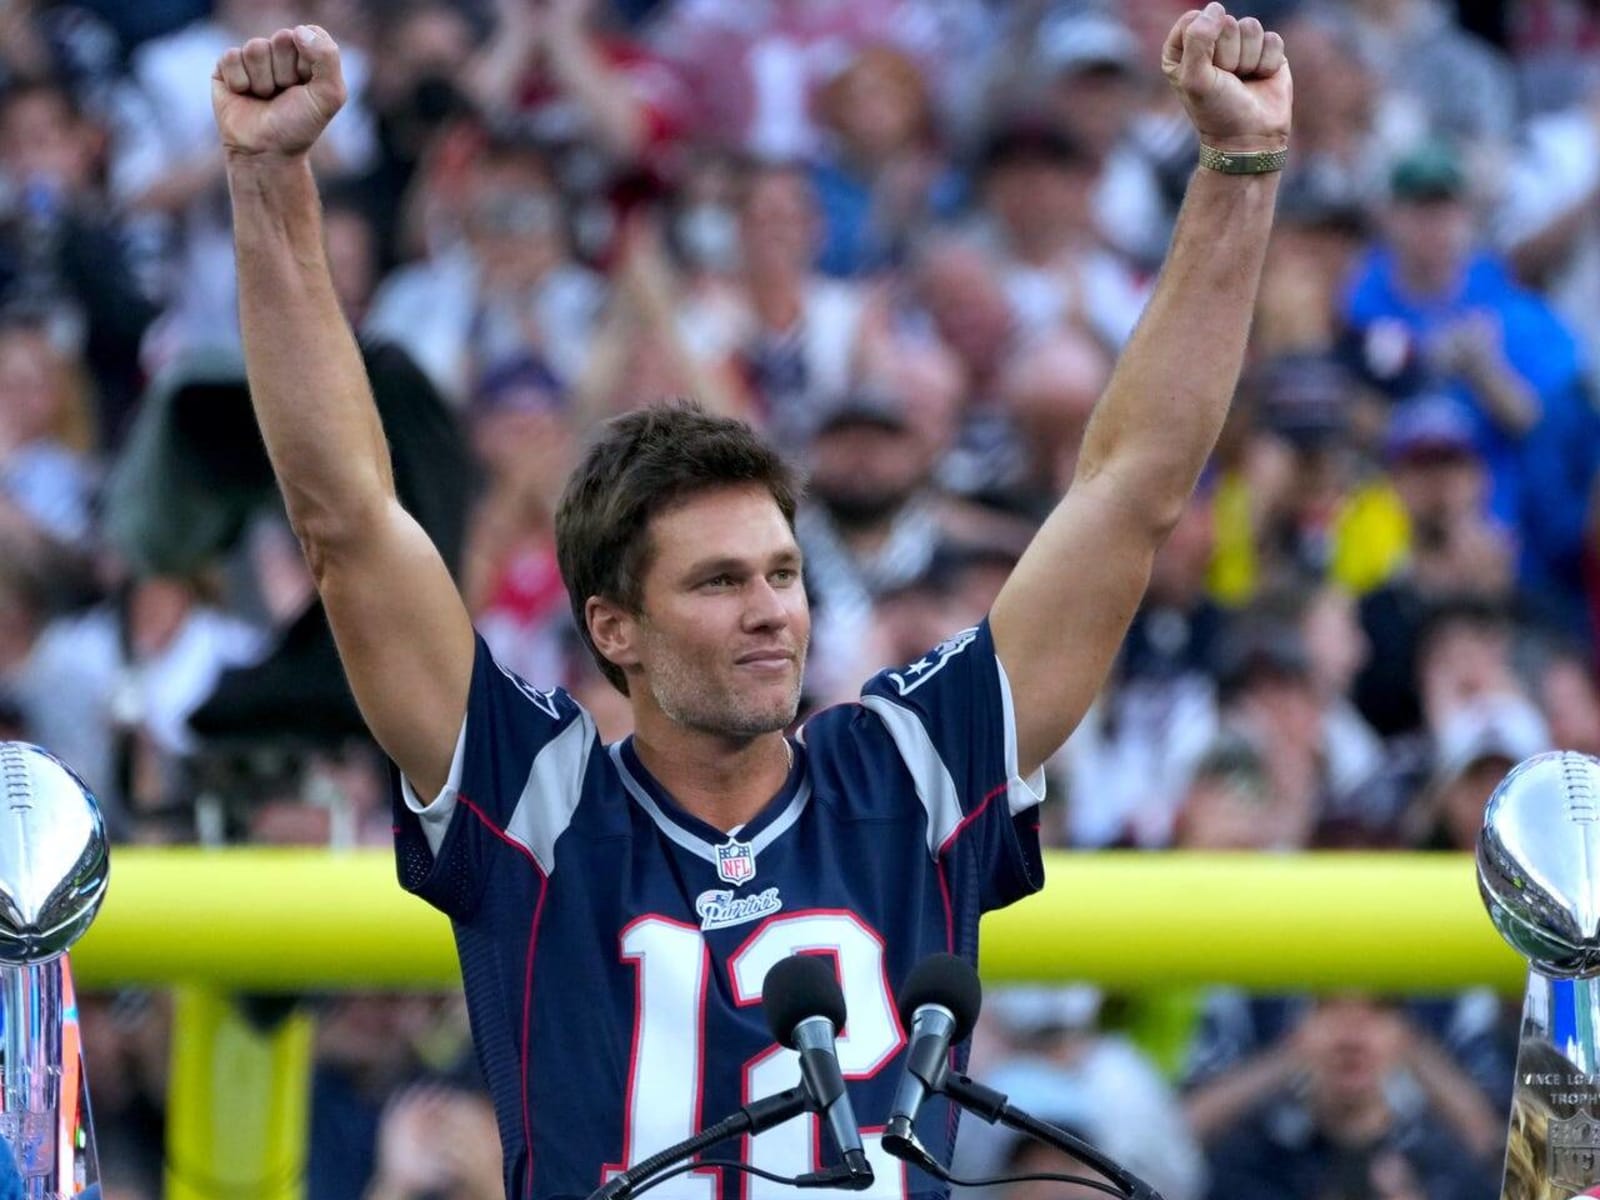 Tom Brady acknowledges he's been in contact with the Patriots